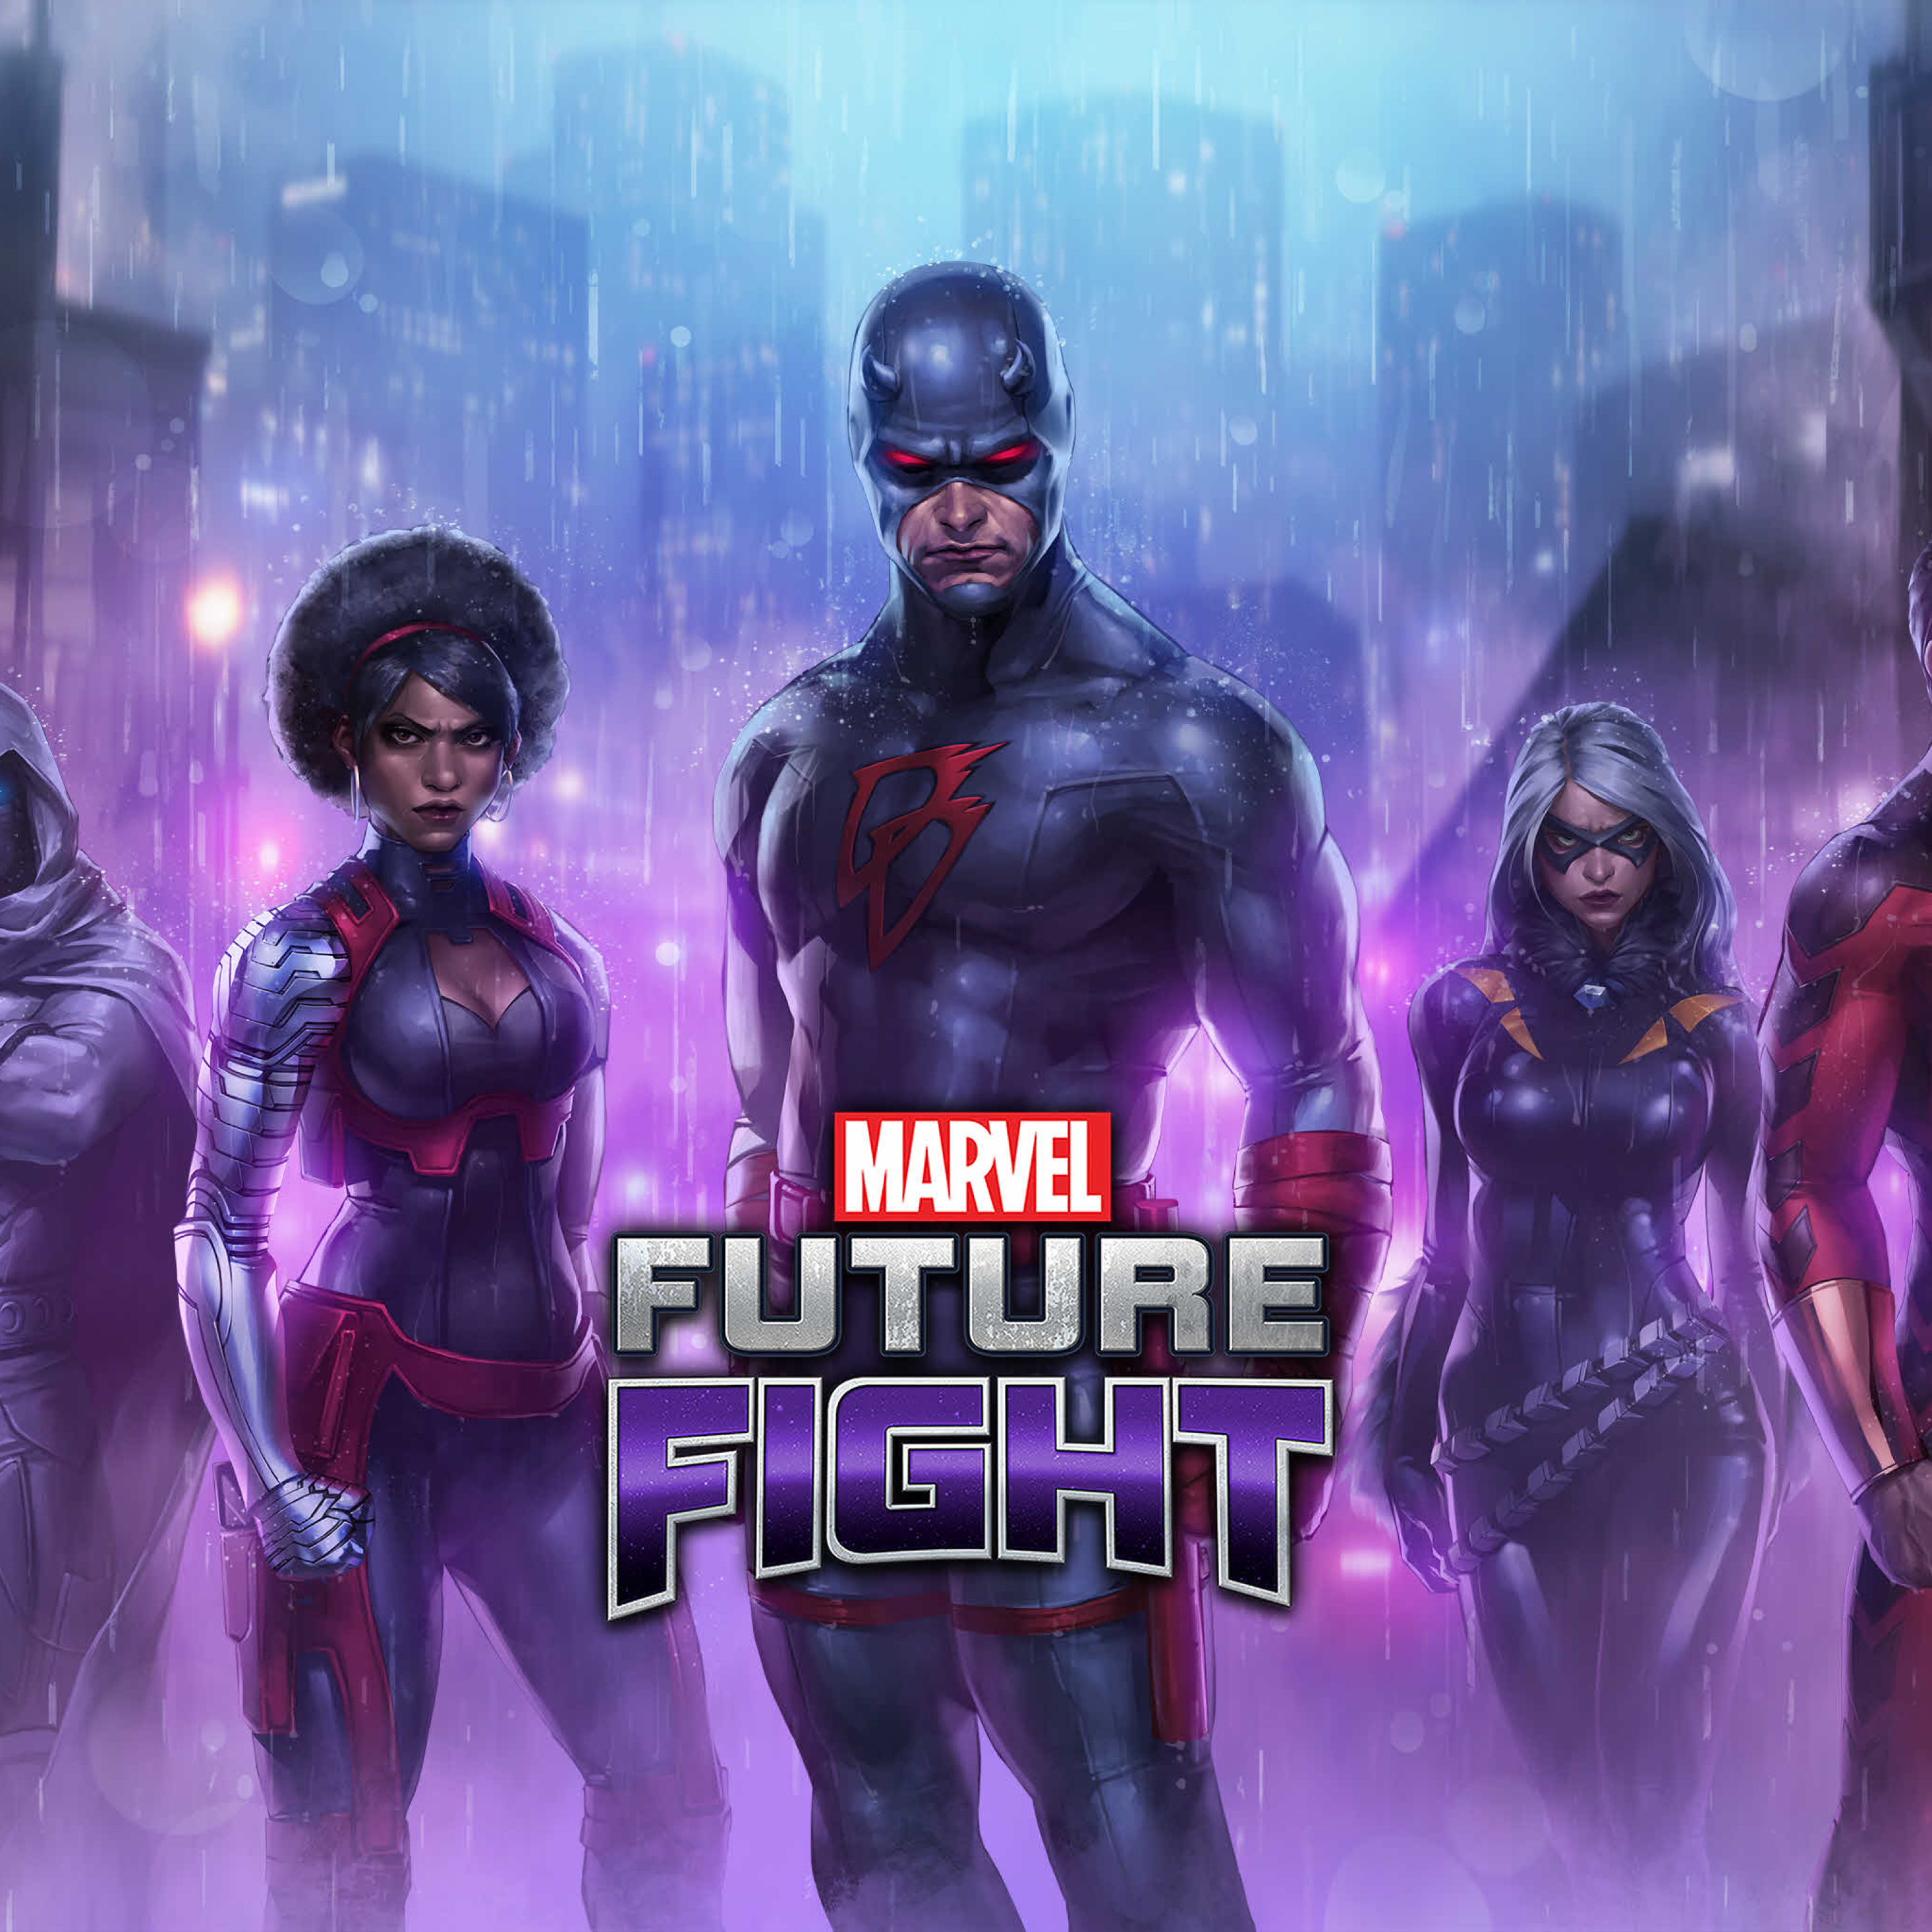 Download Marvel Future Fight Video Game 2048x1152 ...